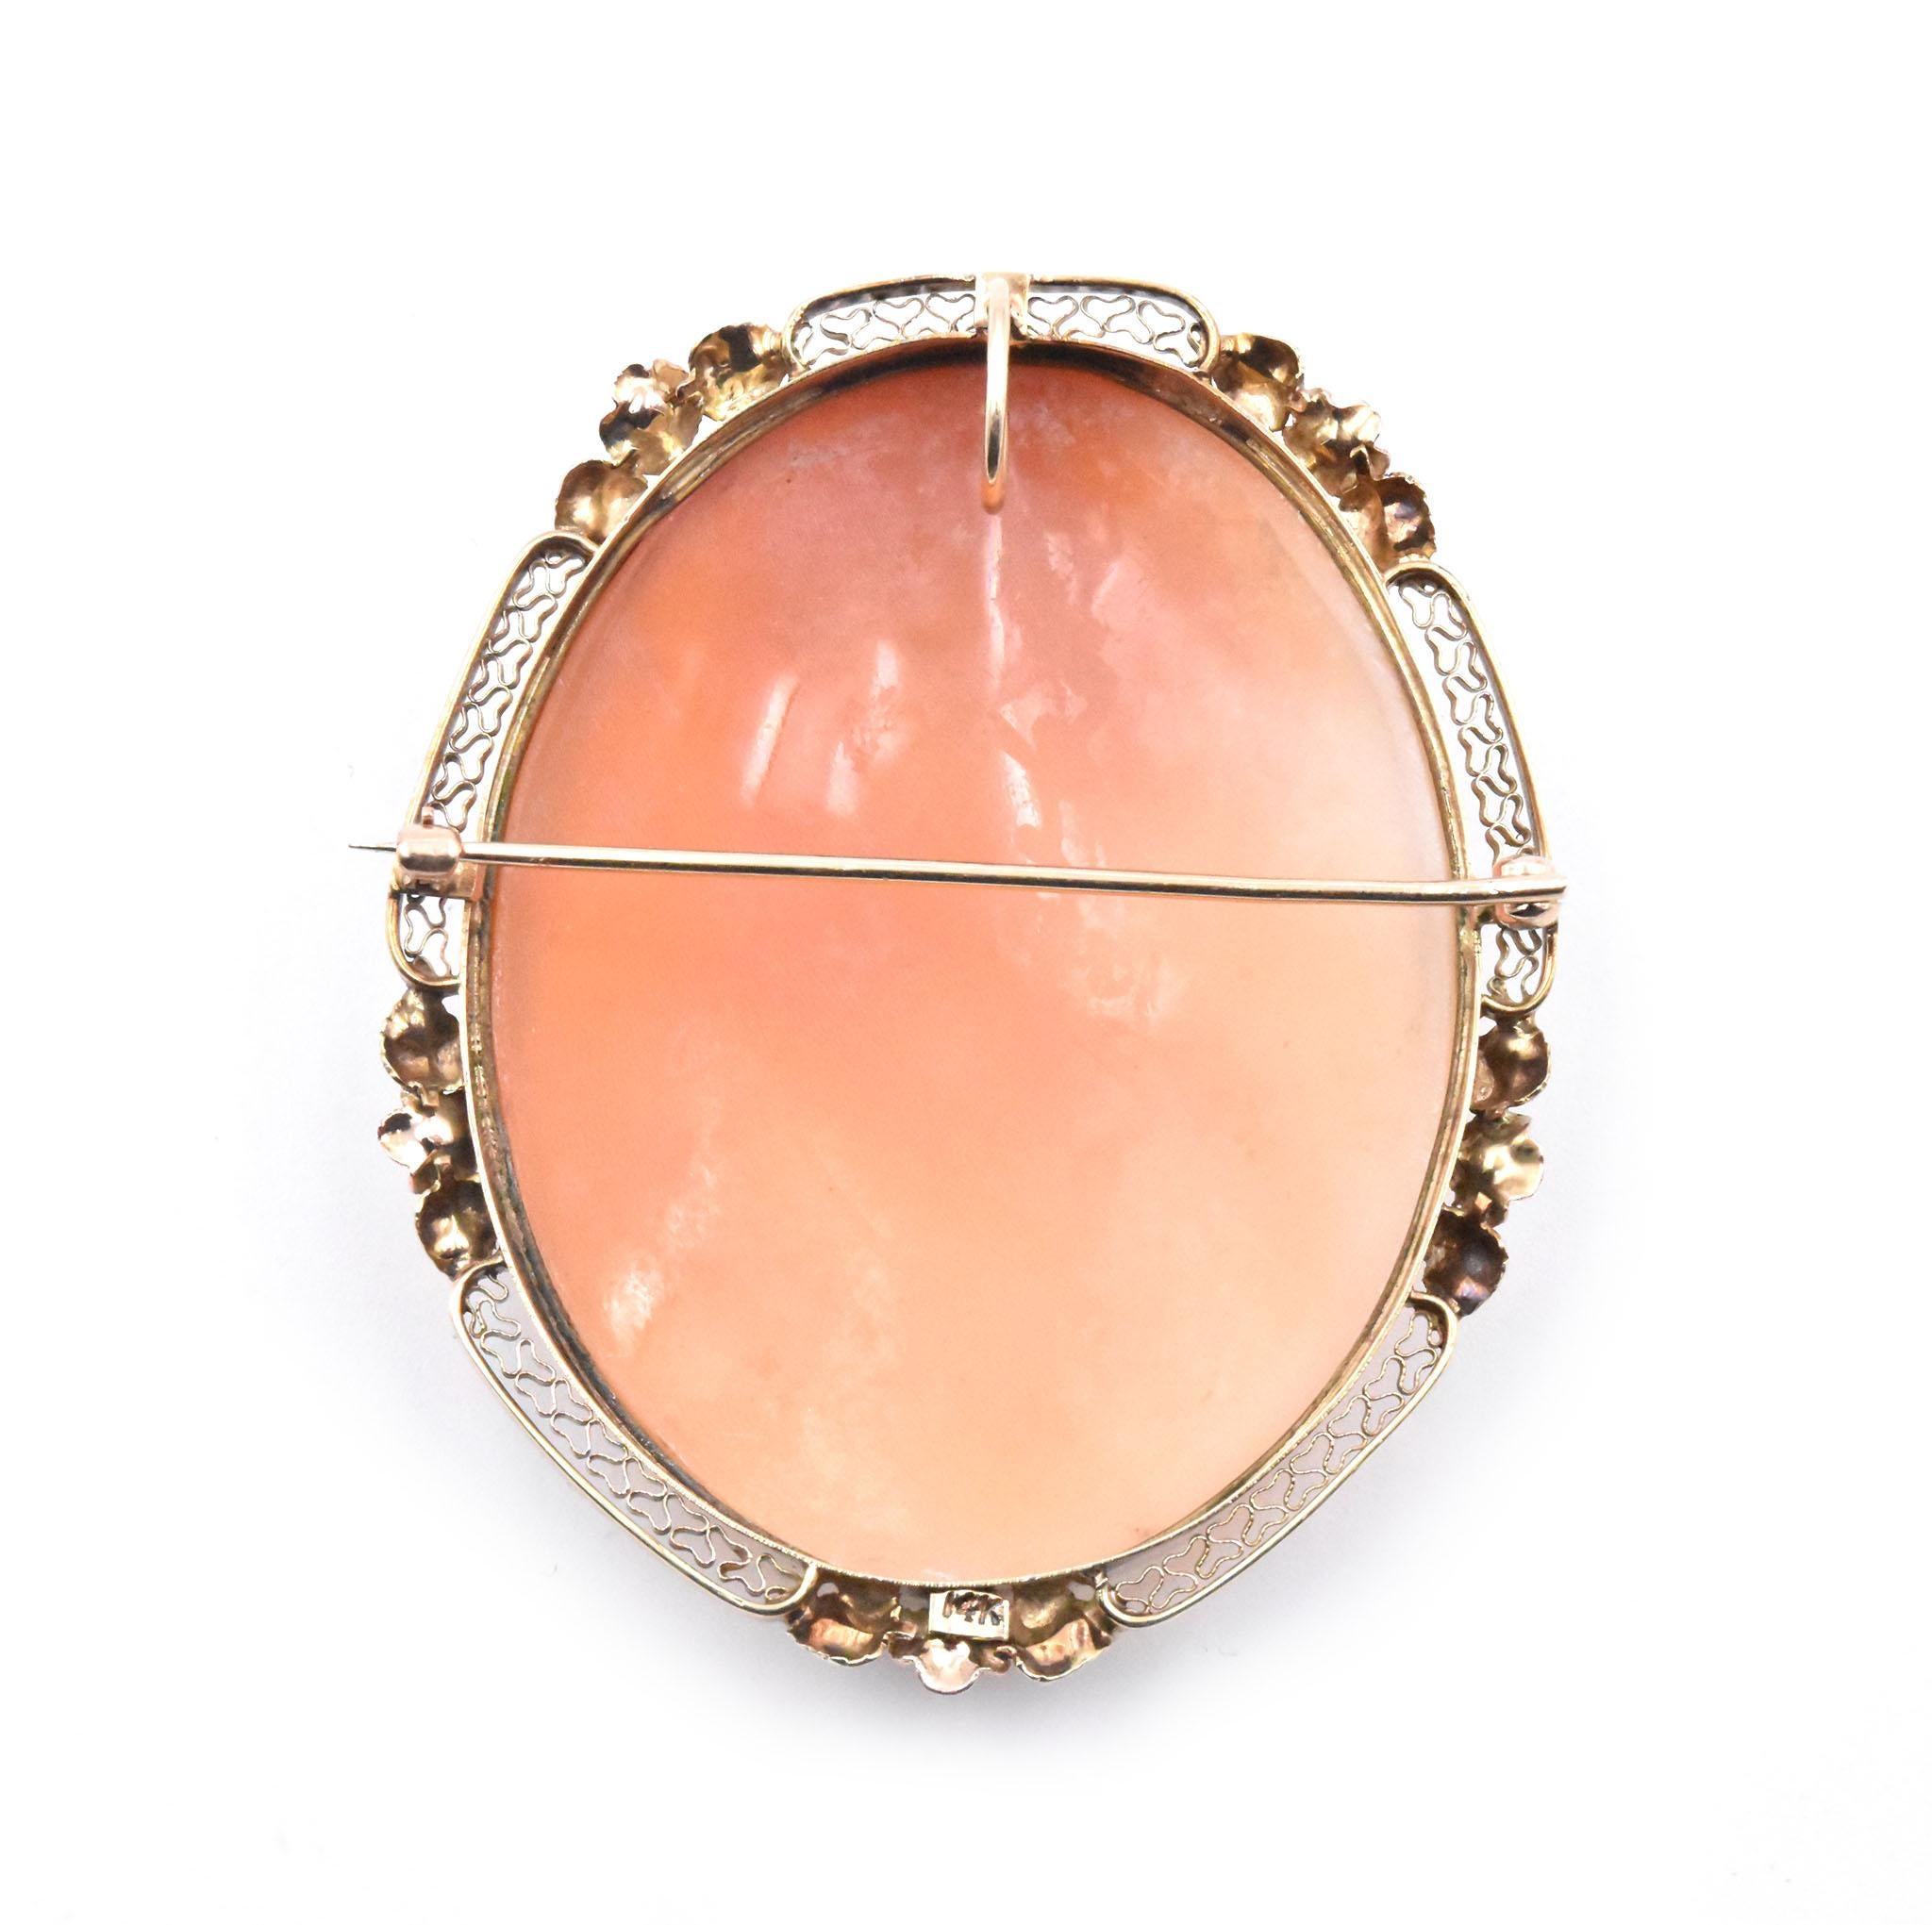 14 Karat Yellow Gold Vintage Cameo Pin In Excellent Condition For Sale In Scottsdale, AZ